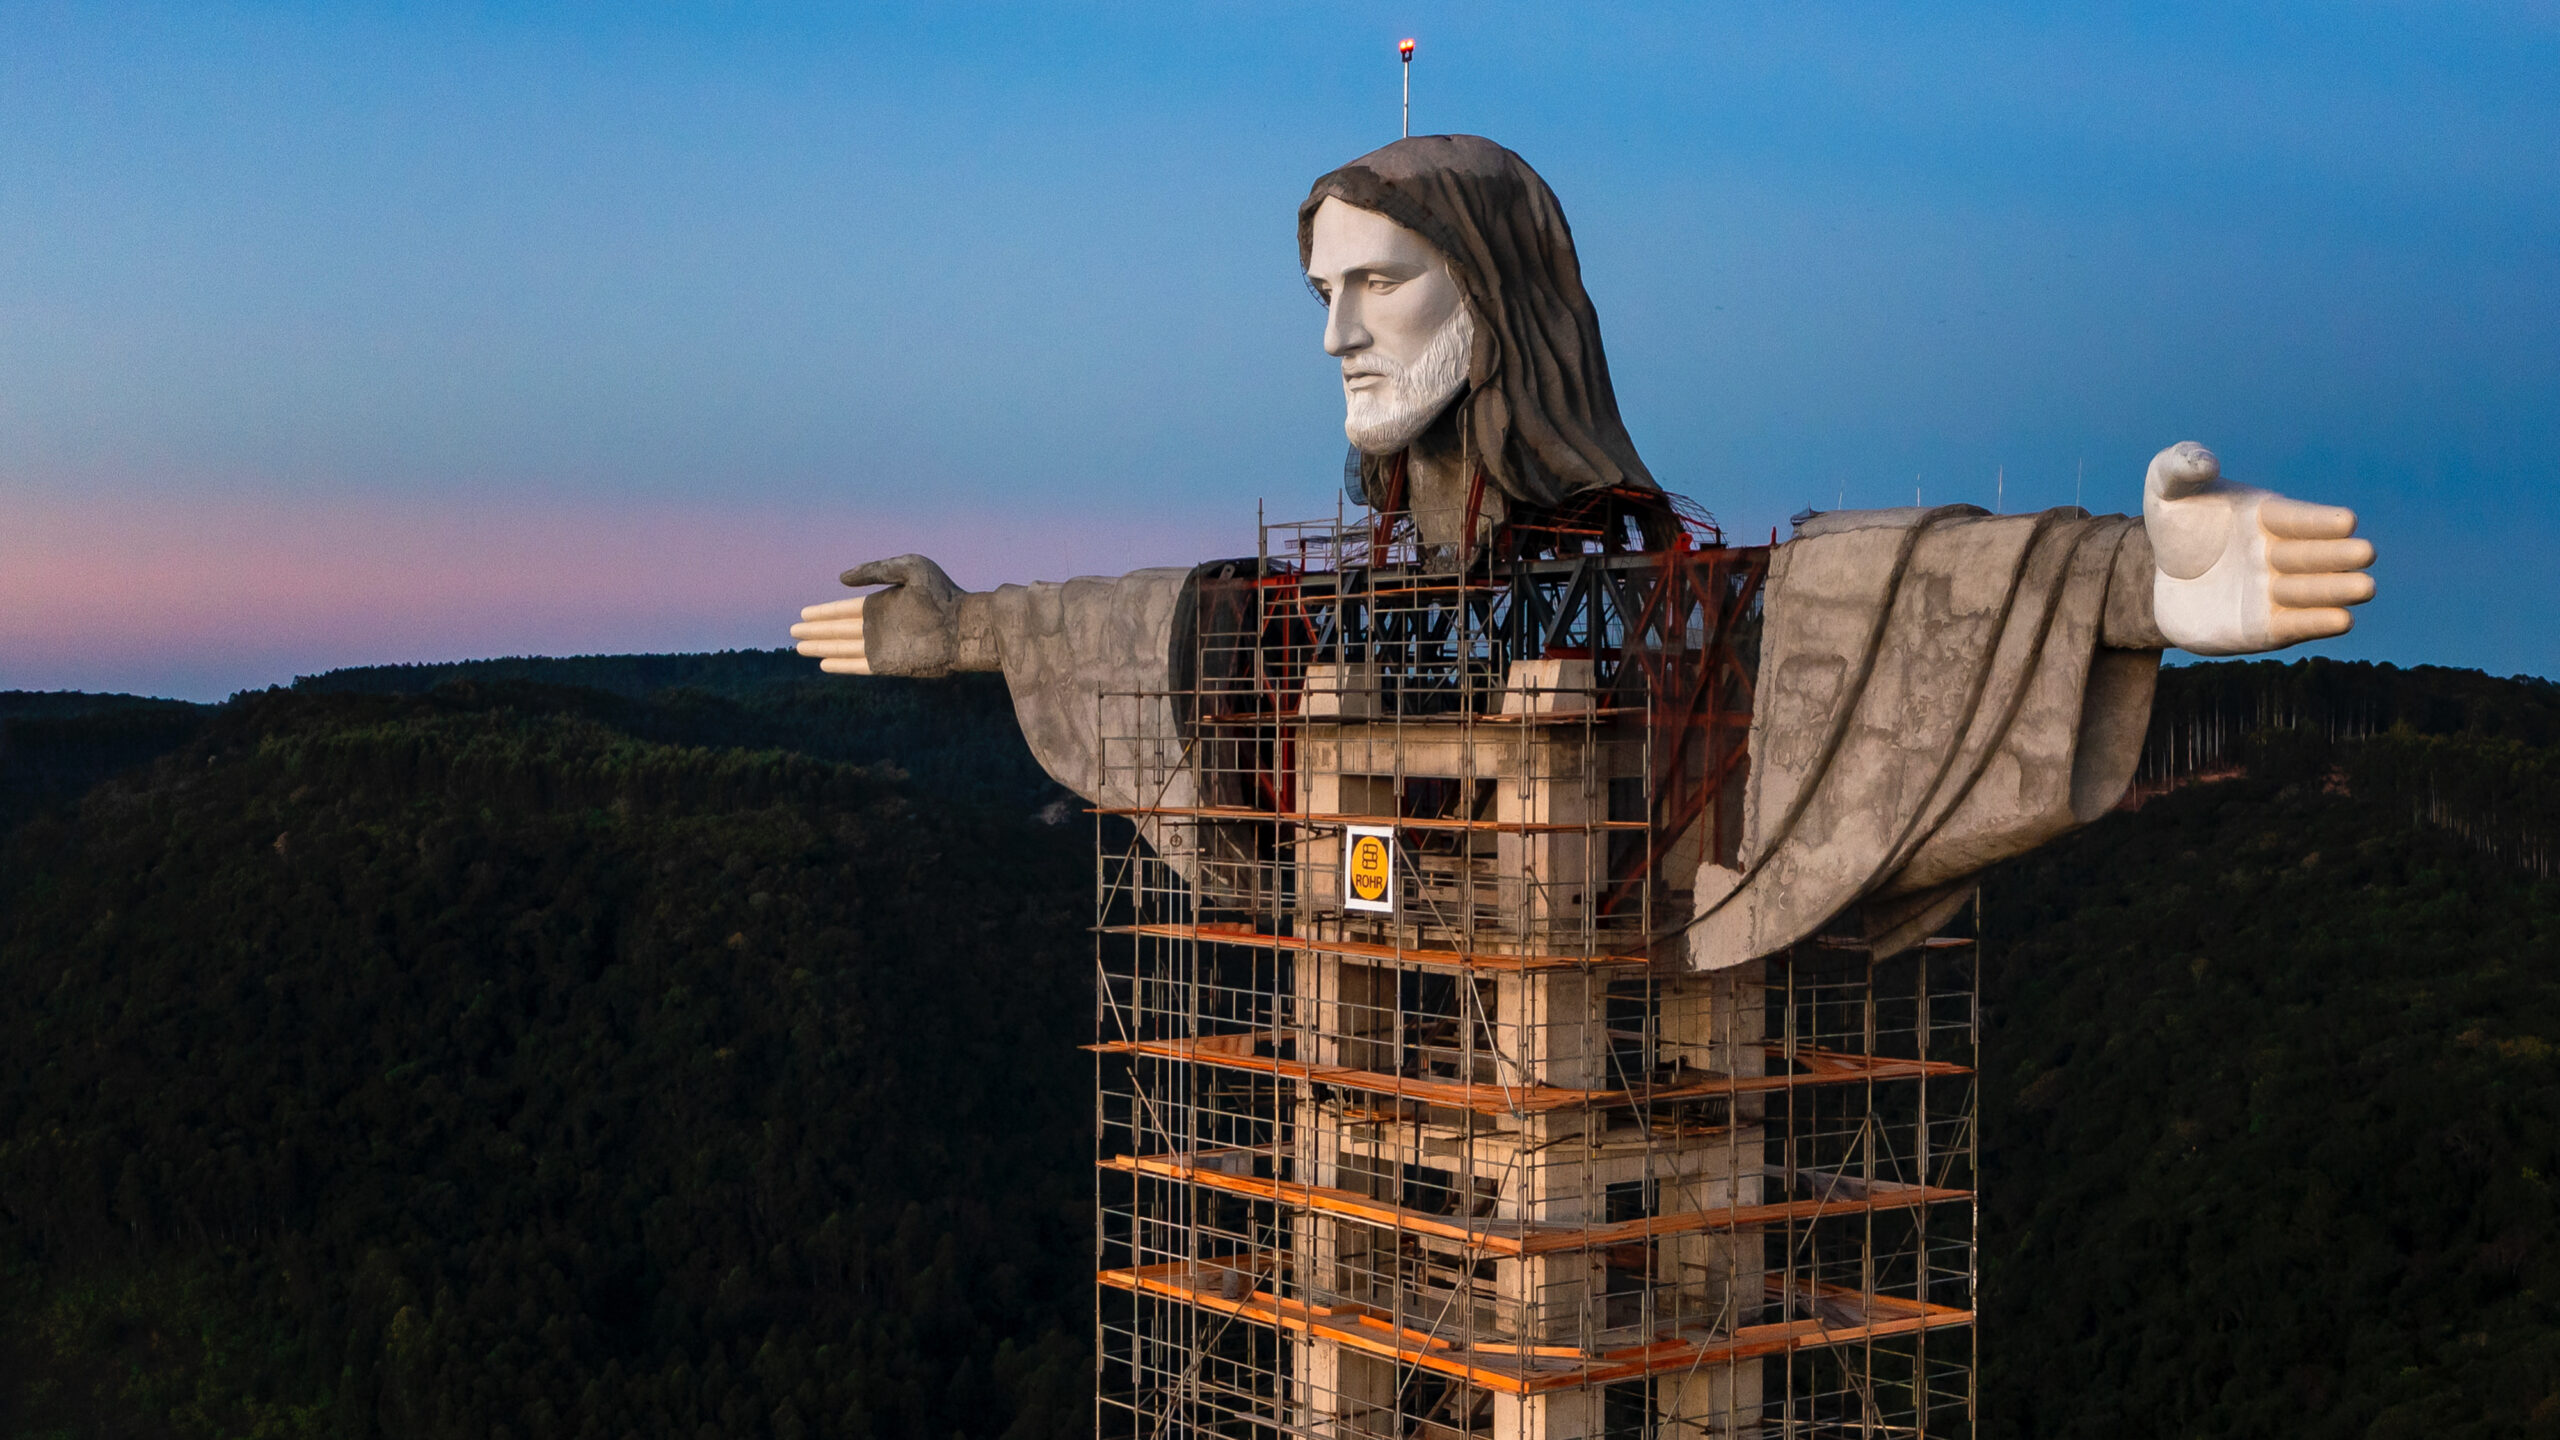 Jesus from Świebodzin uses the T-pose to assert his domination over Jesus  from Rio, from whom he is 3 meters taller : r/dankmemes